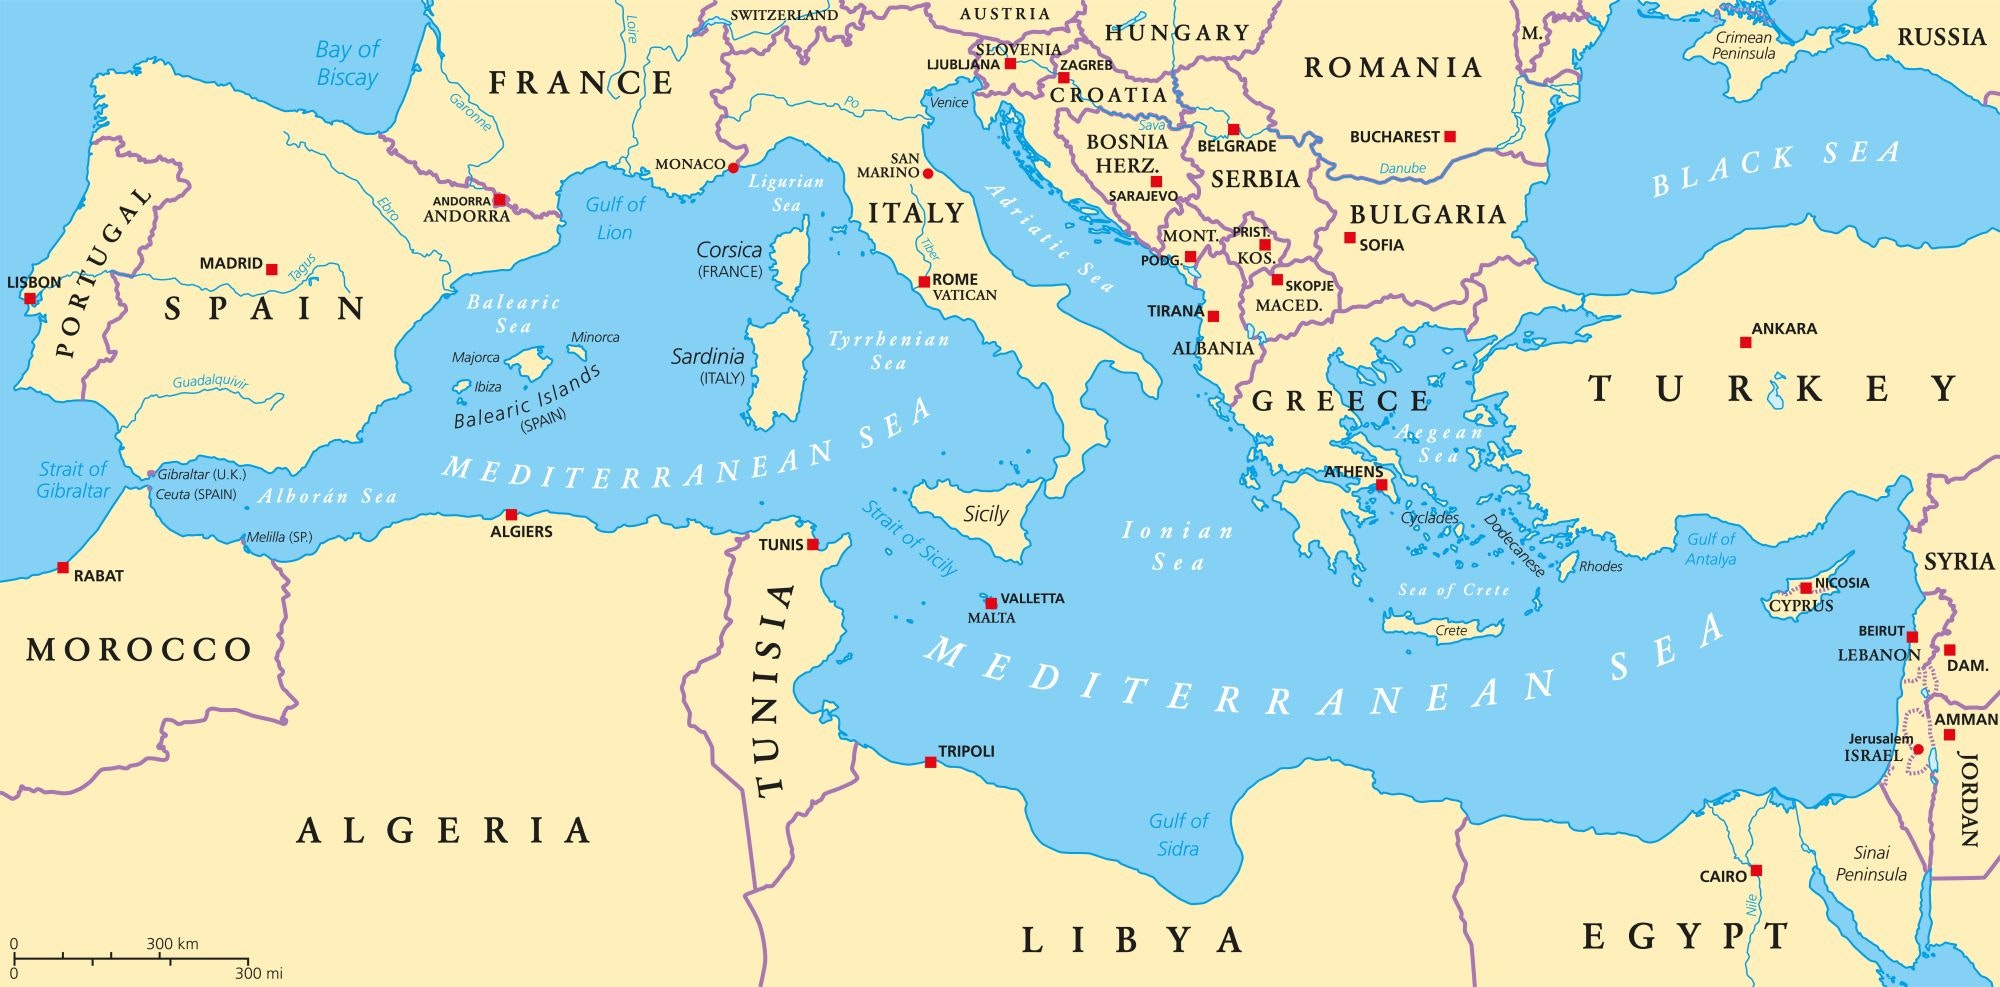 Map of the Mediterranean Sea and surrounding land